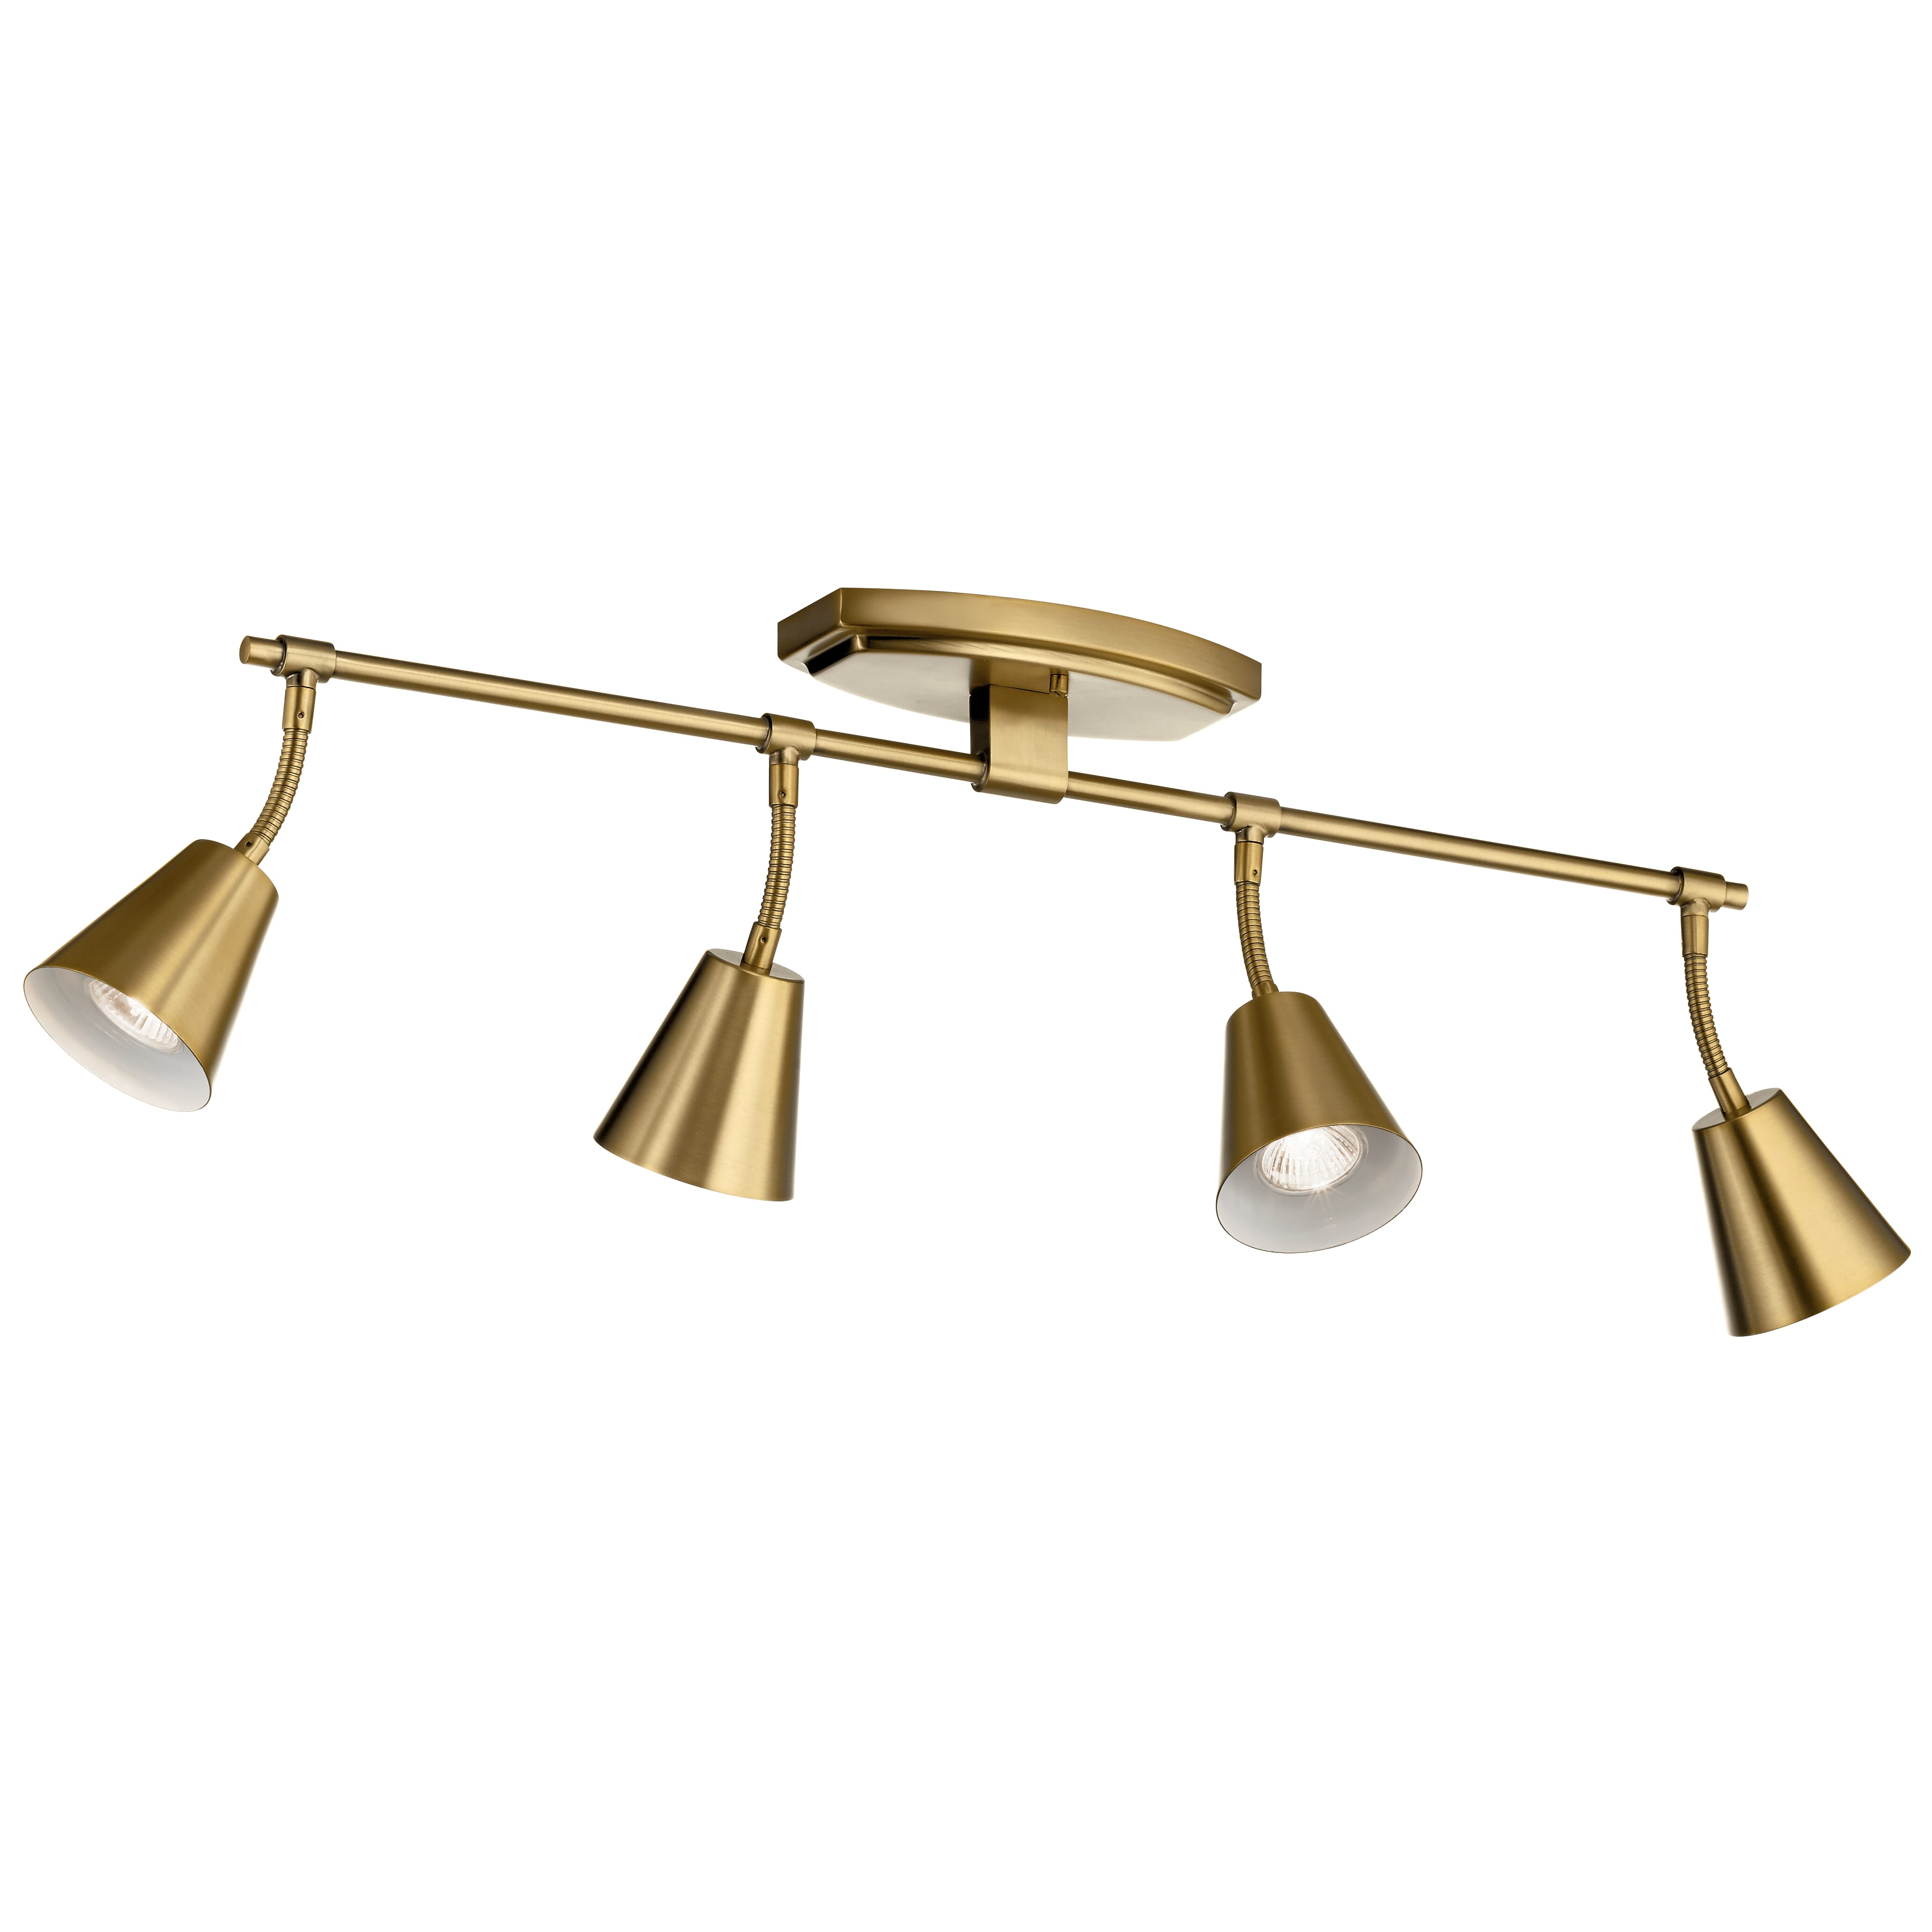 Kichler Sylvia 4-Light Rail Light in Brushed Natural Brass - How to Style Track Lights and Chandeliers in the Same Space - LightsOnline Blog